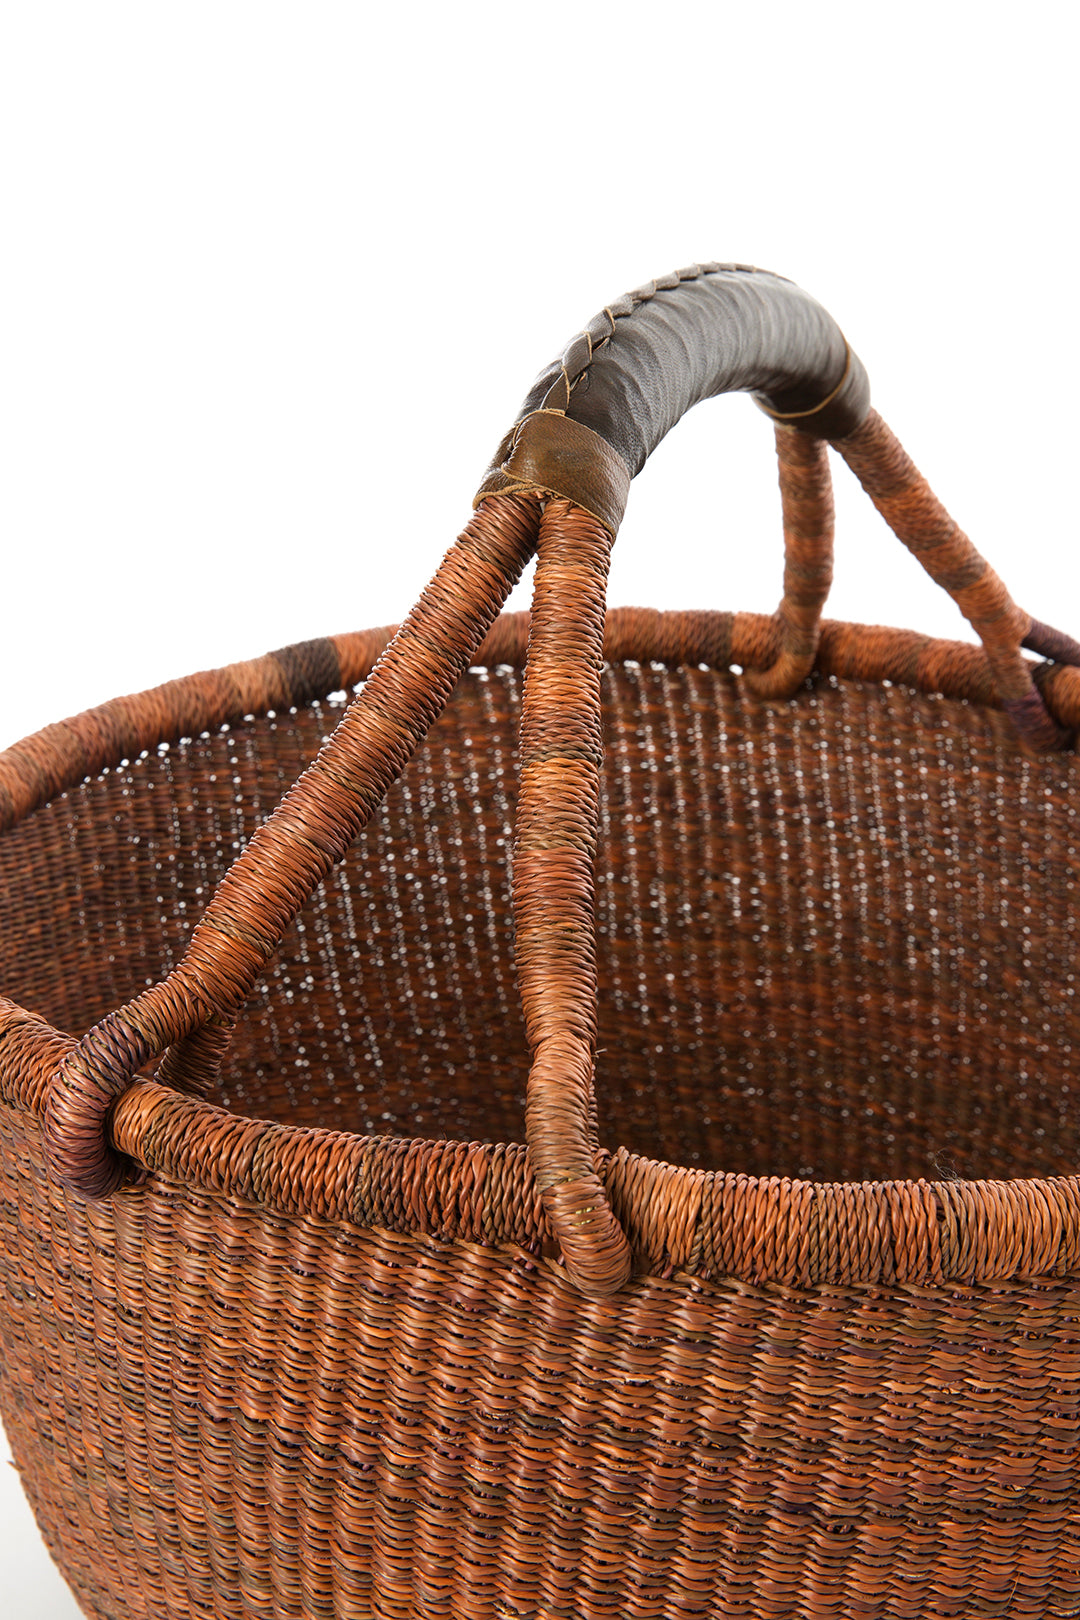 Cinnamon Stick Bolga Basket with Leather Wrapped Handles